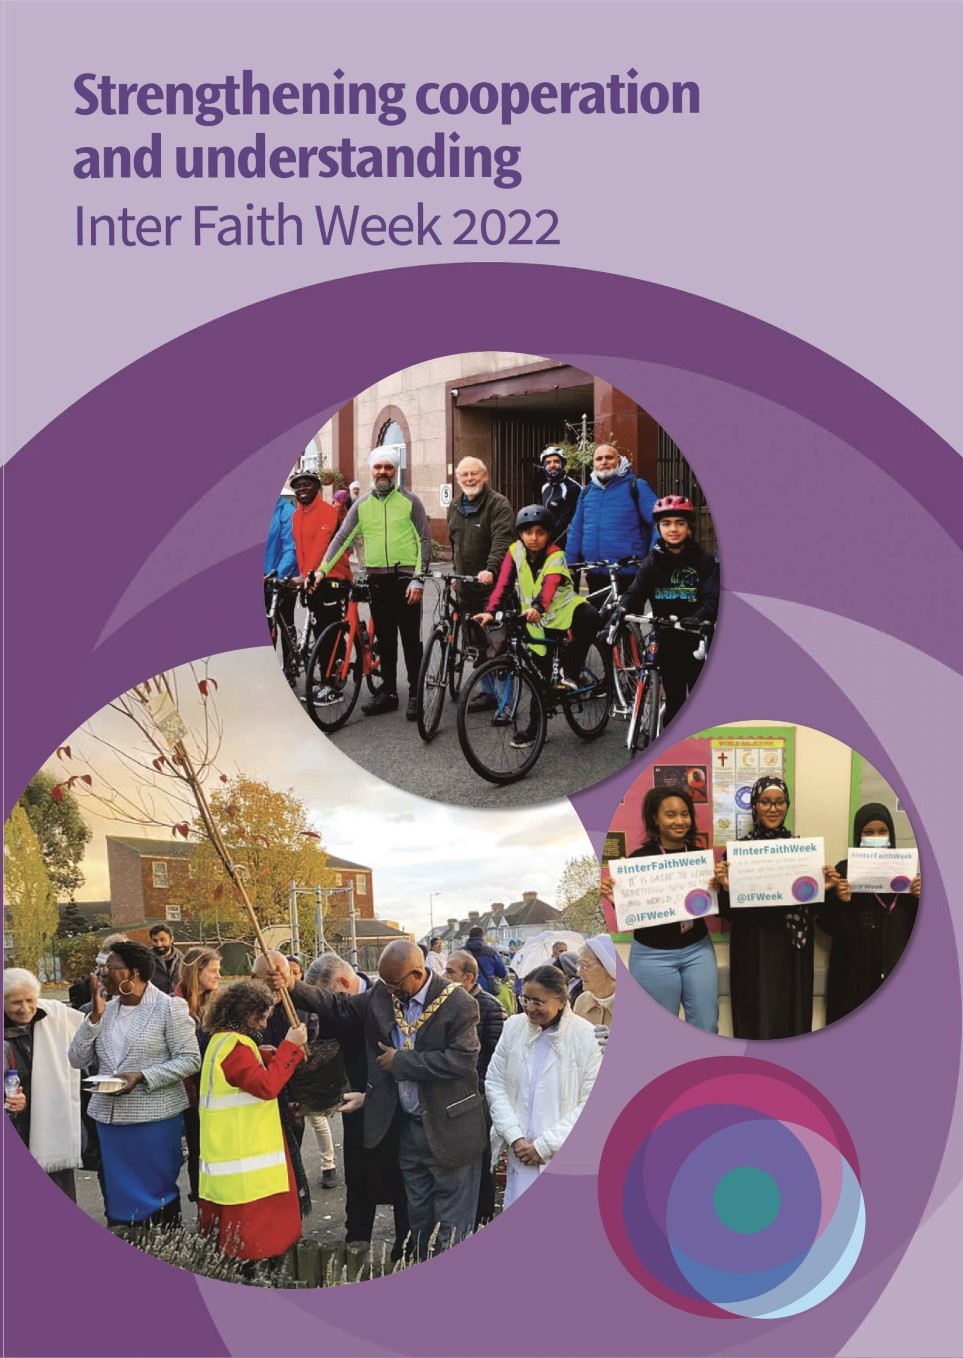 Strengthening cooperation and understanding: Inter Faith Week 2022